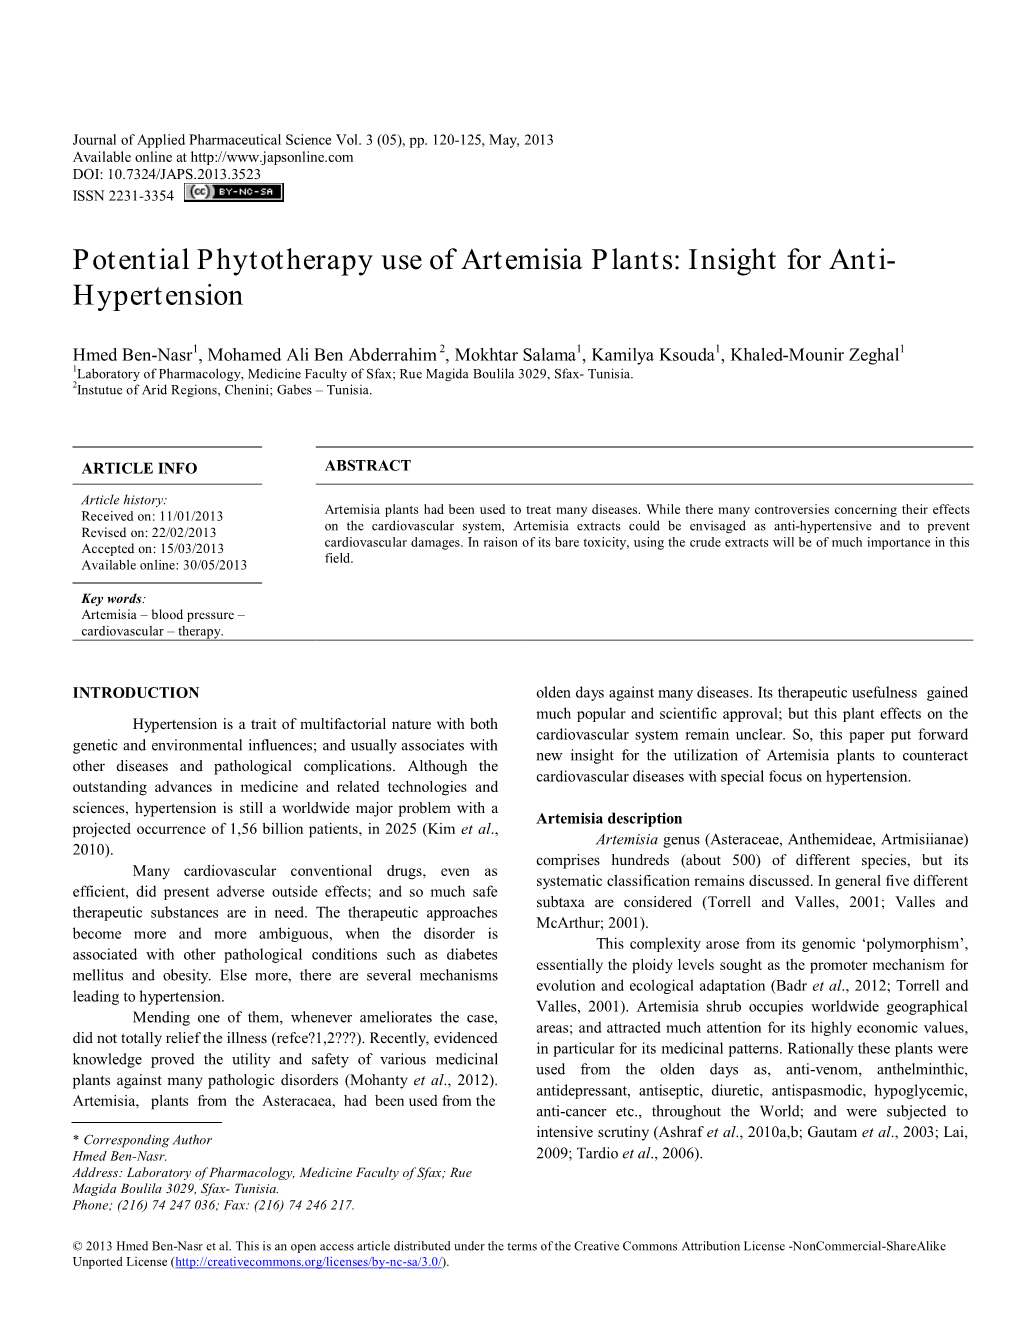 Potential Phytotherapy Use of Artemisia Plants: Insight for Anti- Hypertension